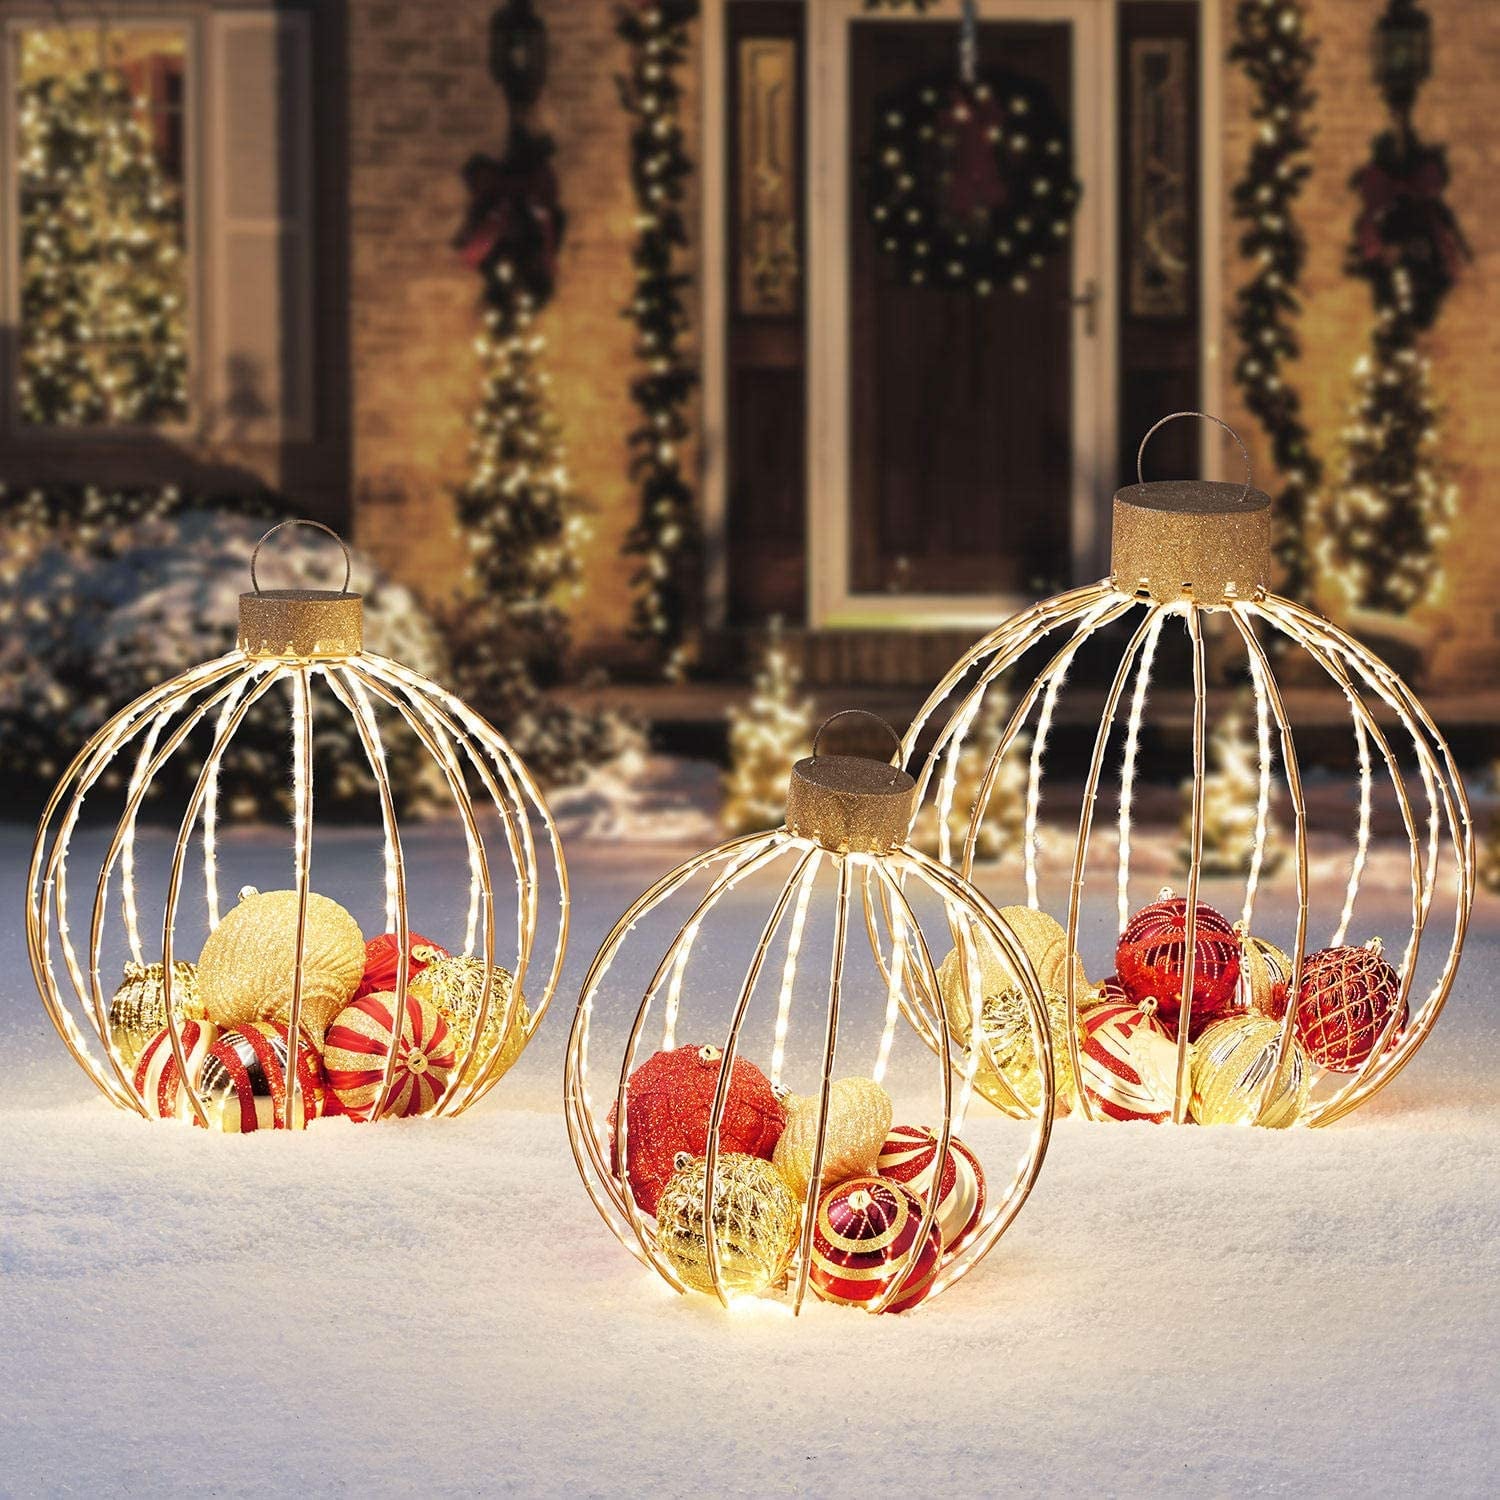 Outdoor Lighted Christmas Decorations 